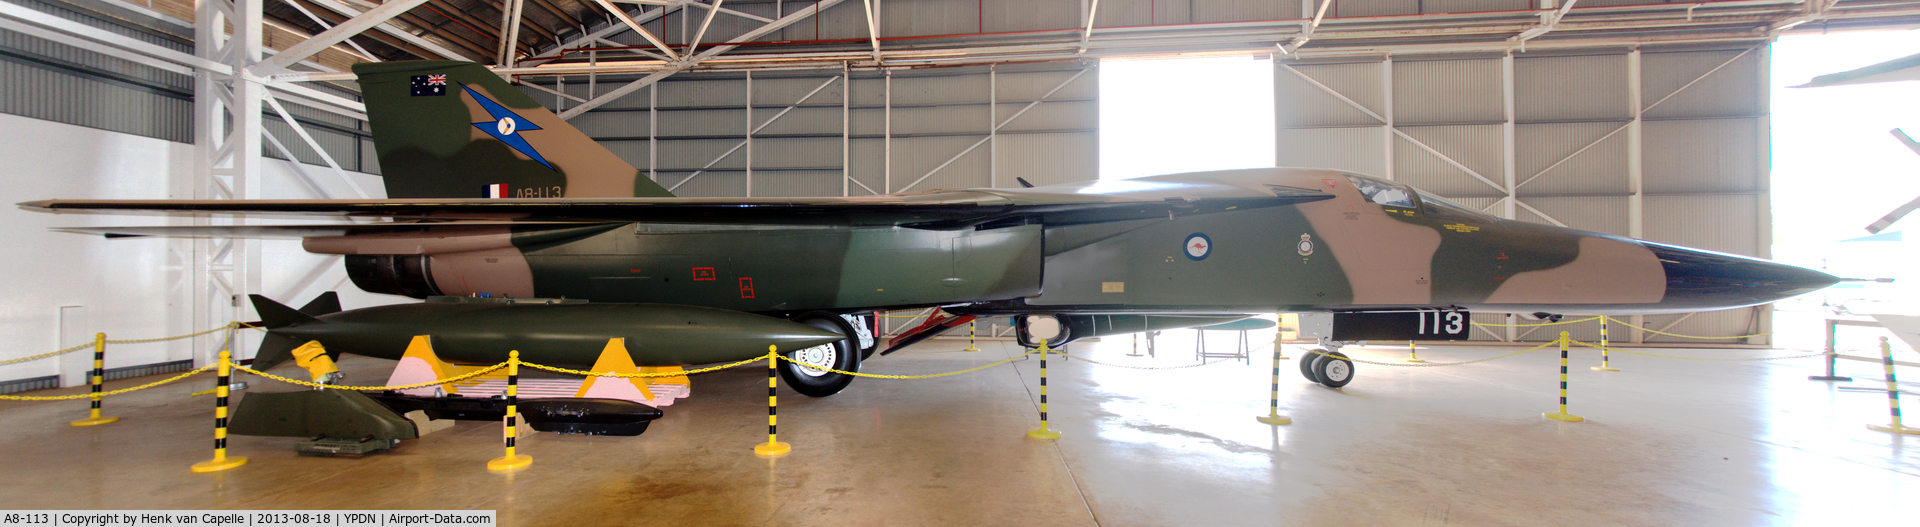 A8-113, General Dynamics F-111C Aardvark C/N A1-158, F-111C A8-113 has been preserved at the Australian Aviation Heritage Centre at Darwin airport.